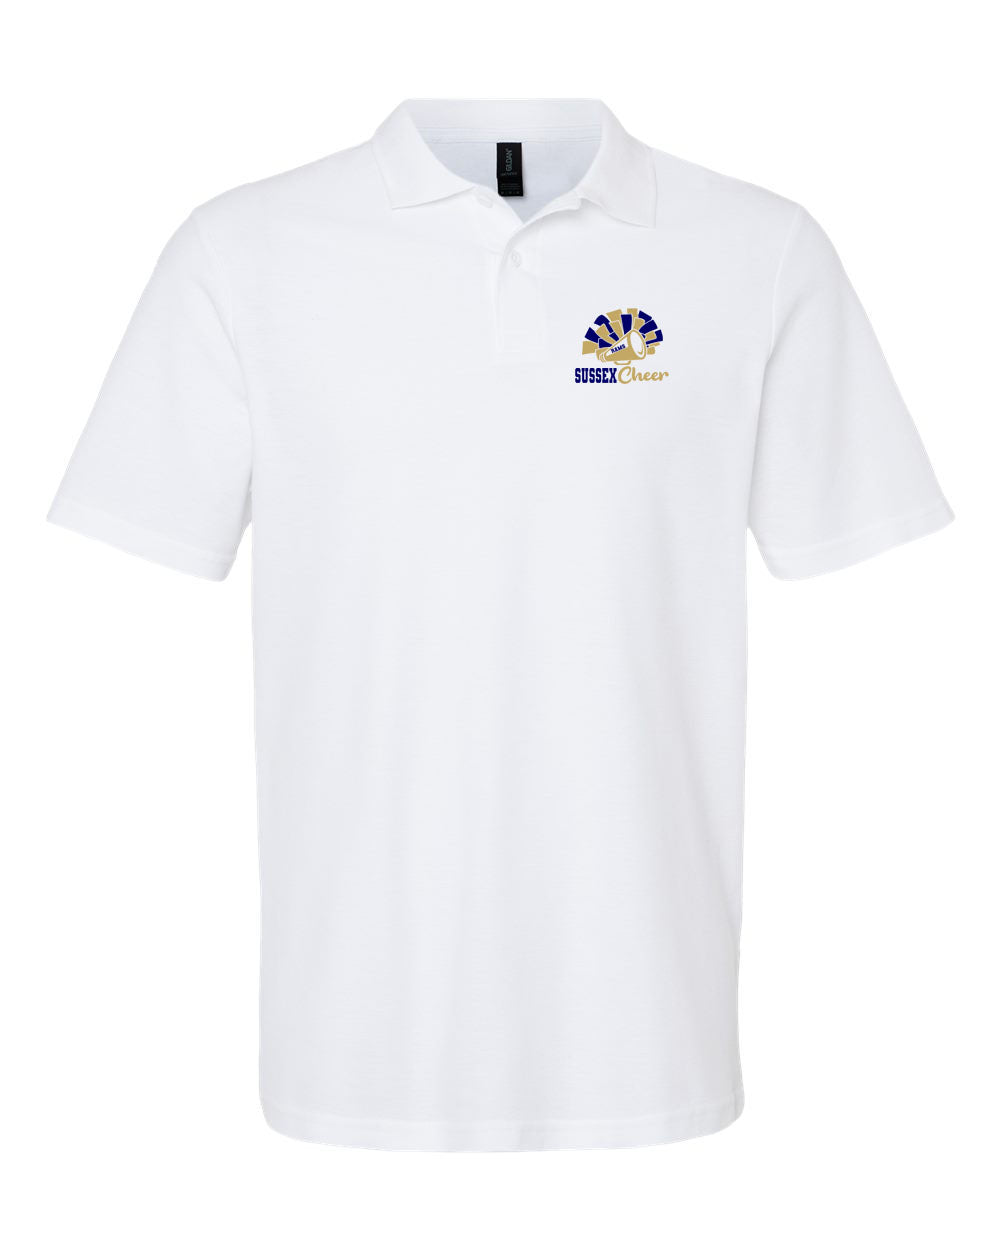 Sussex Middle Cheer Polo T-Shirt Design 2